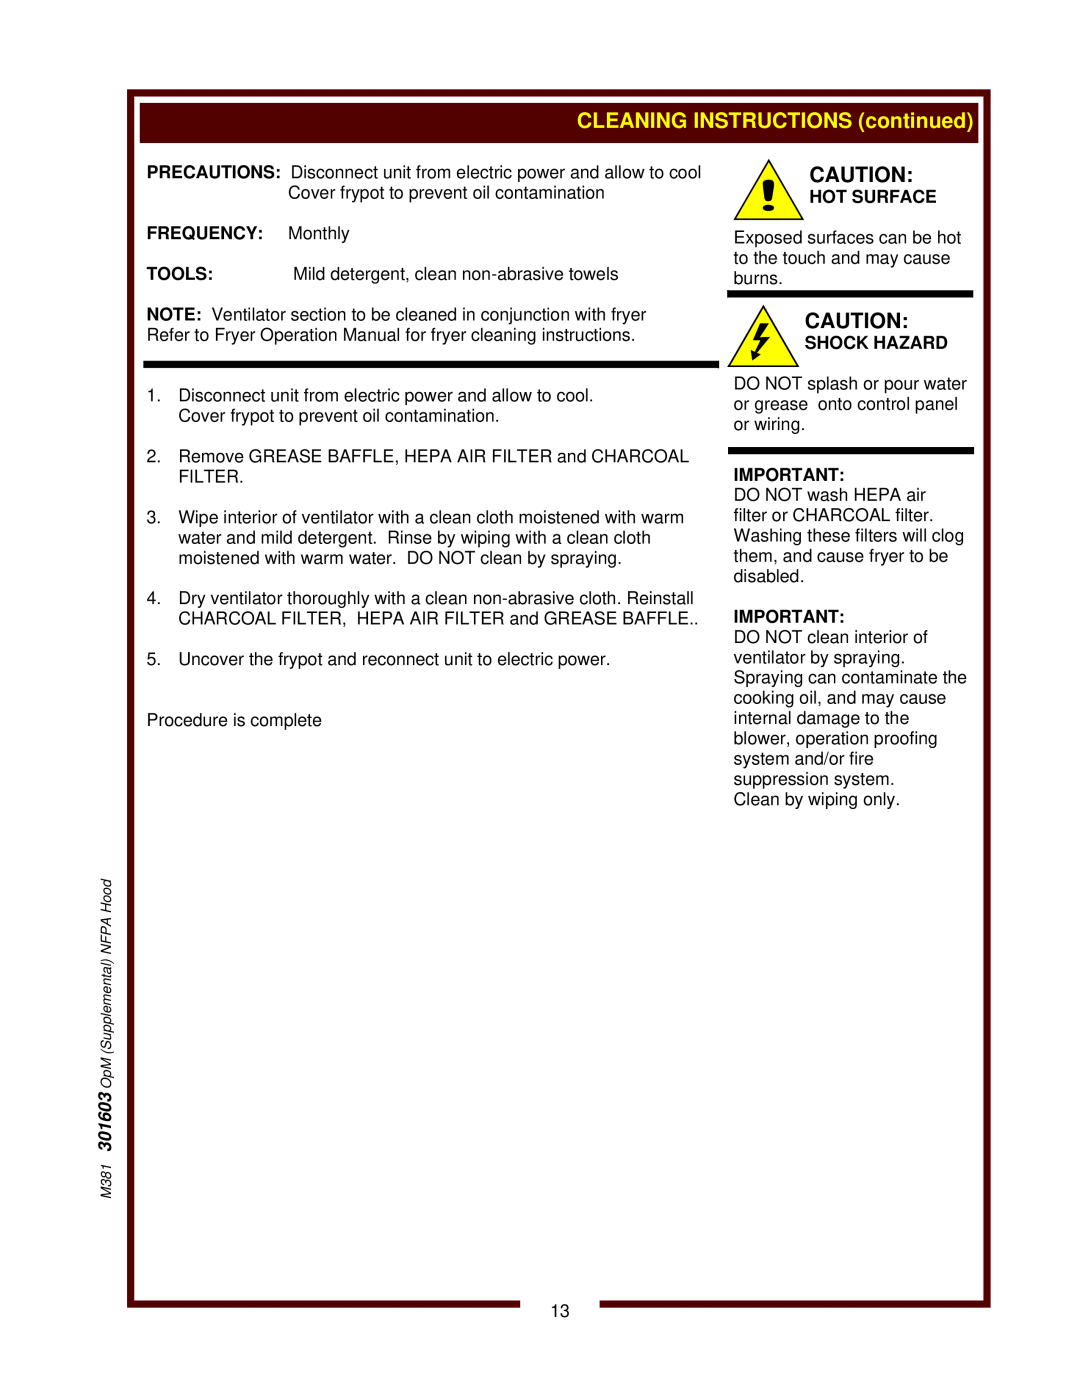 Wells WVPE-30F, WVAE-30F, WVAE-55FS operation manual FREQUENCY Monthly, Hot Surface, Shock Hazard 